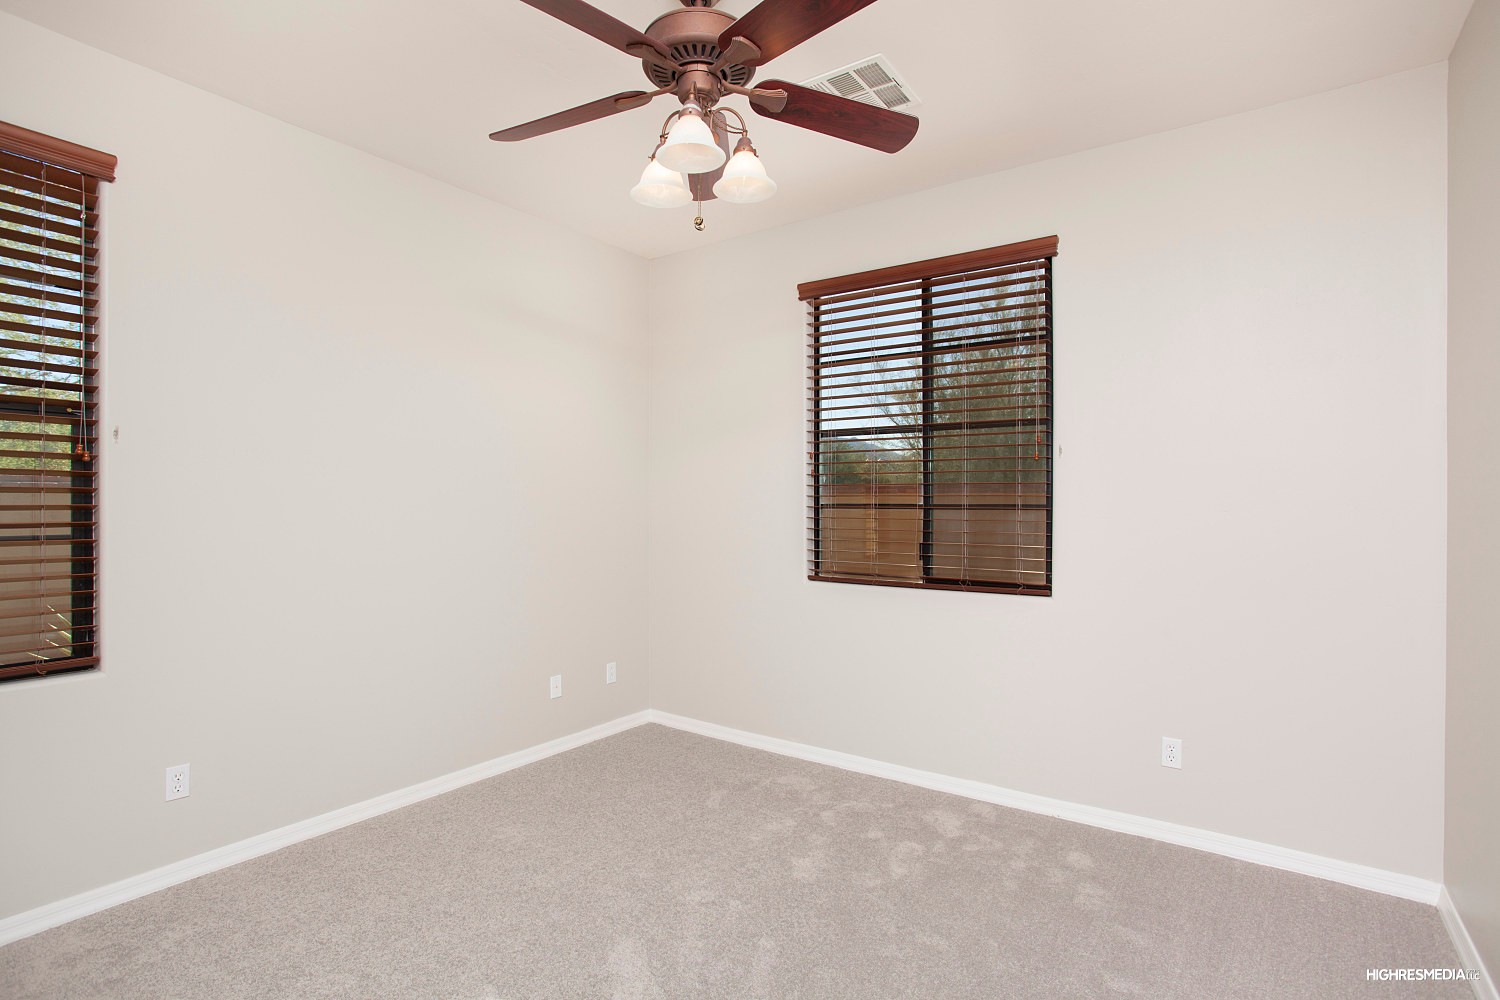 Inviting guest bedroom at this Scottsdale townhome for sale in Market Street at DC Ranch located at 20704 N 90th Pl #1005 Scottsdale, AZ 85255 listed by Don Matheson at The Matheson Team